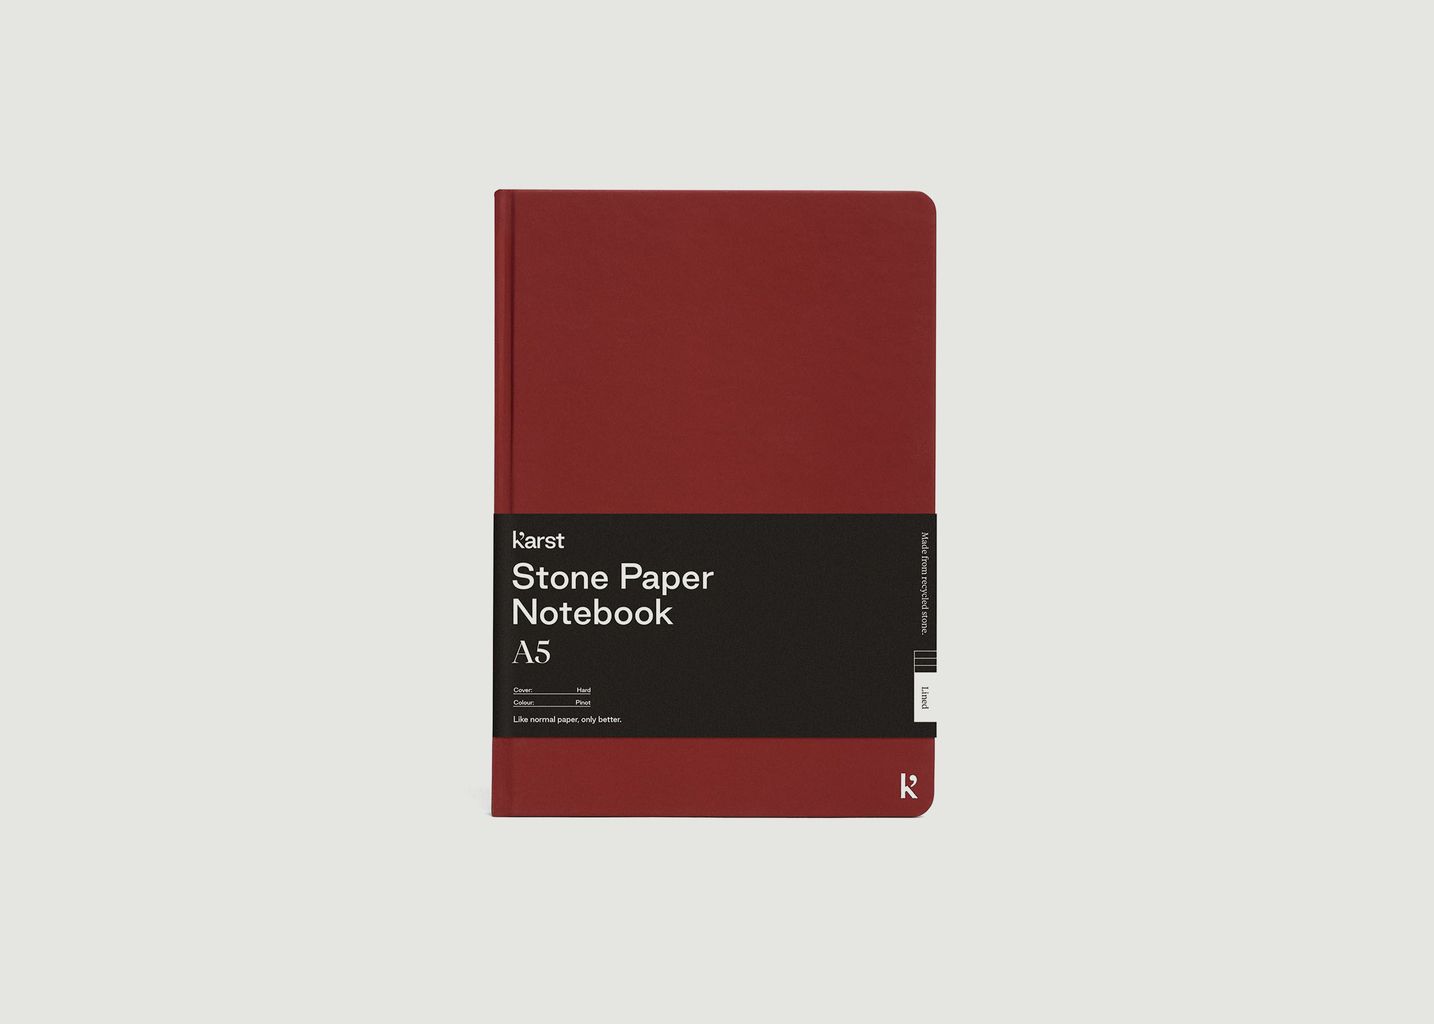 A5 hard cover notebook - Karst Stone Paper